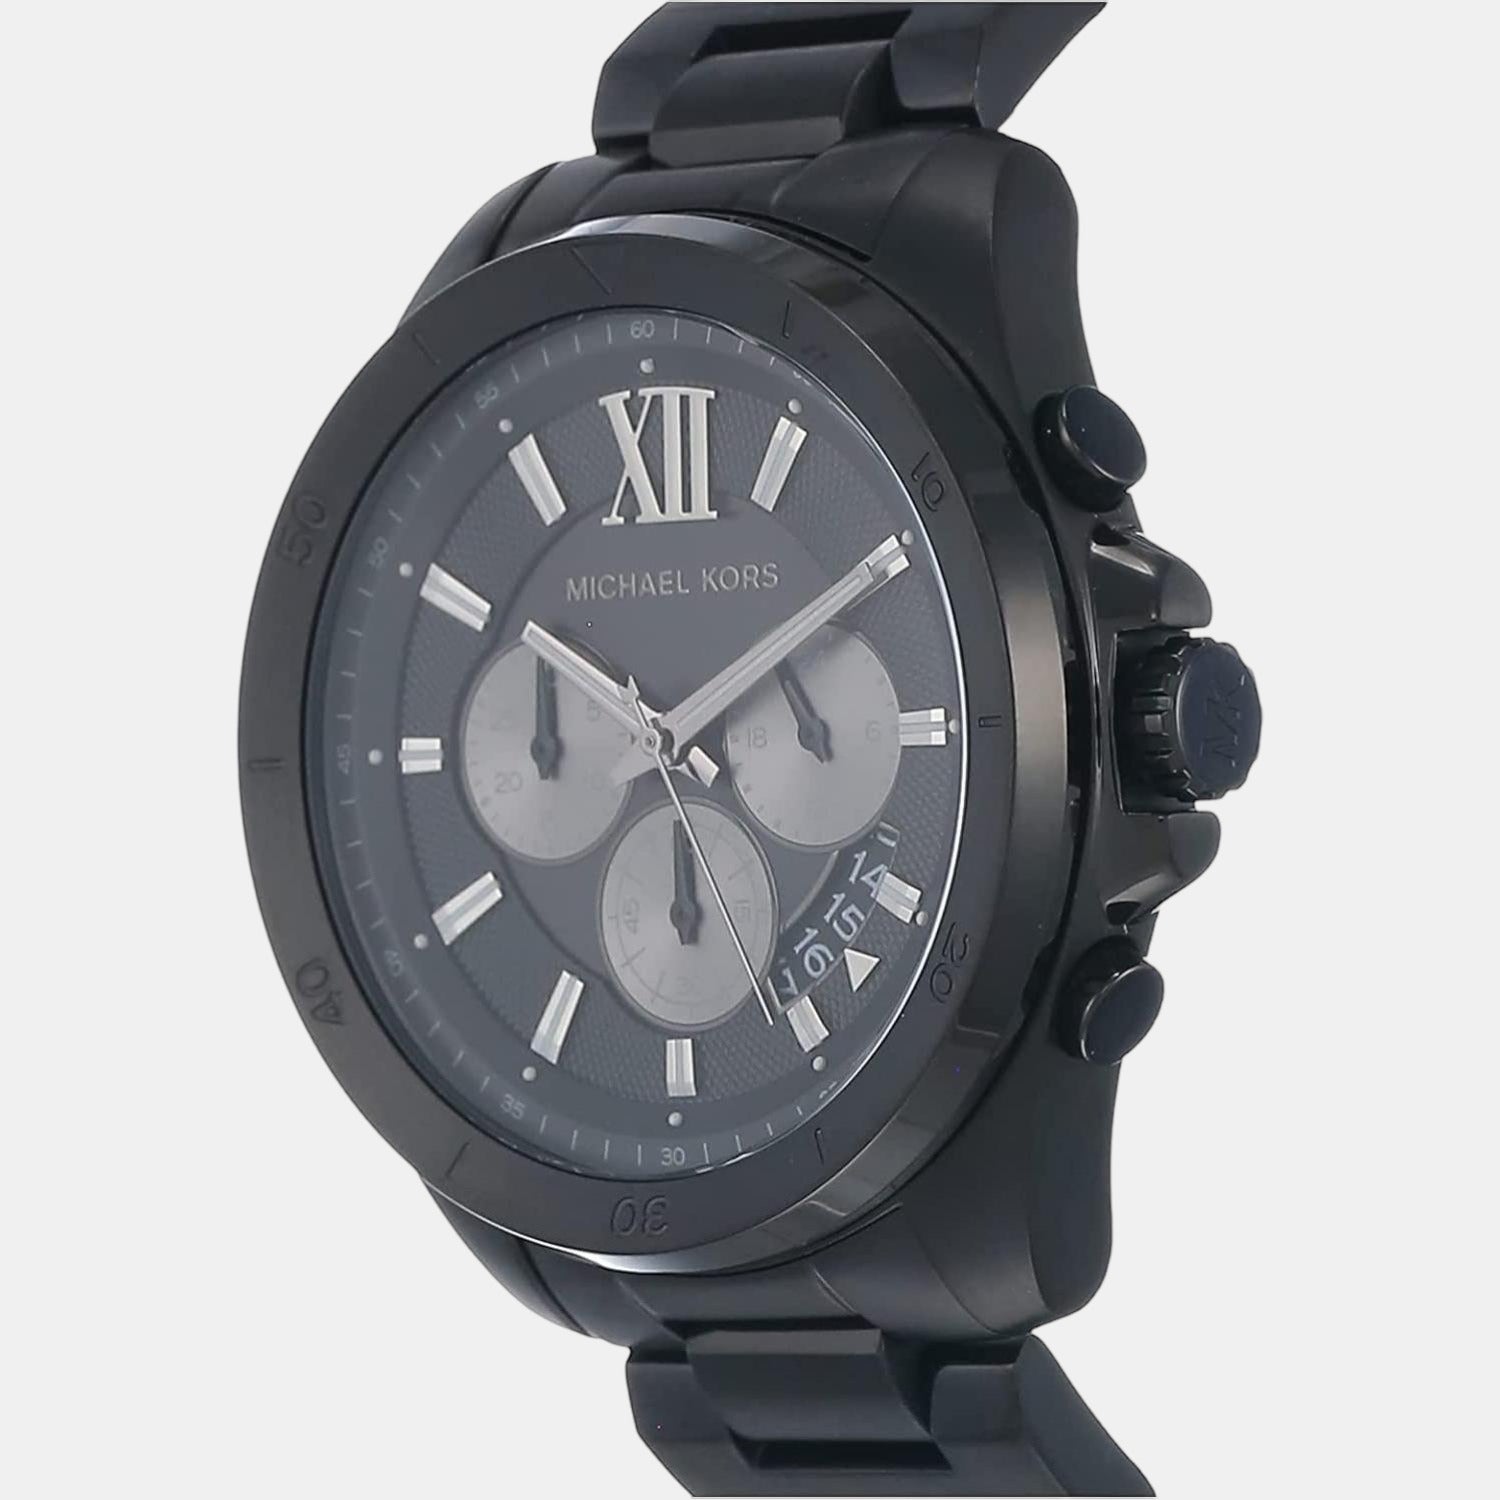 Michael Kors Watches For Boys Hotsell  tabsonscom 1692379046